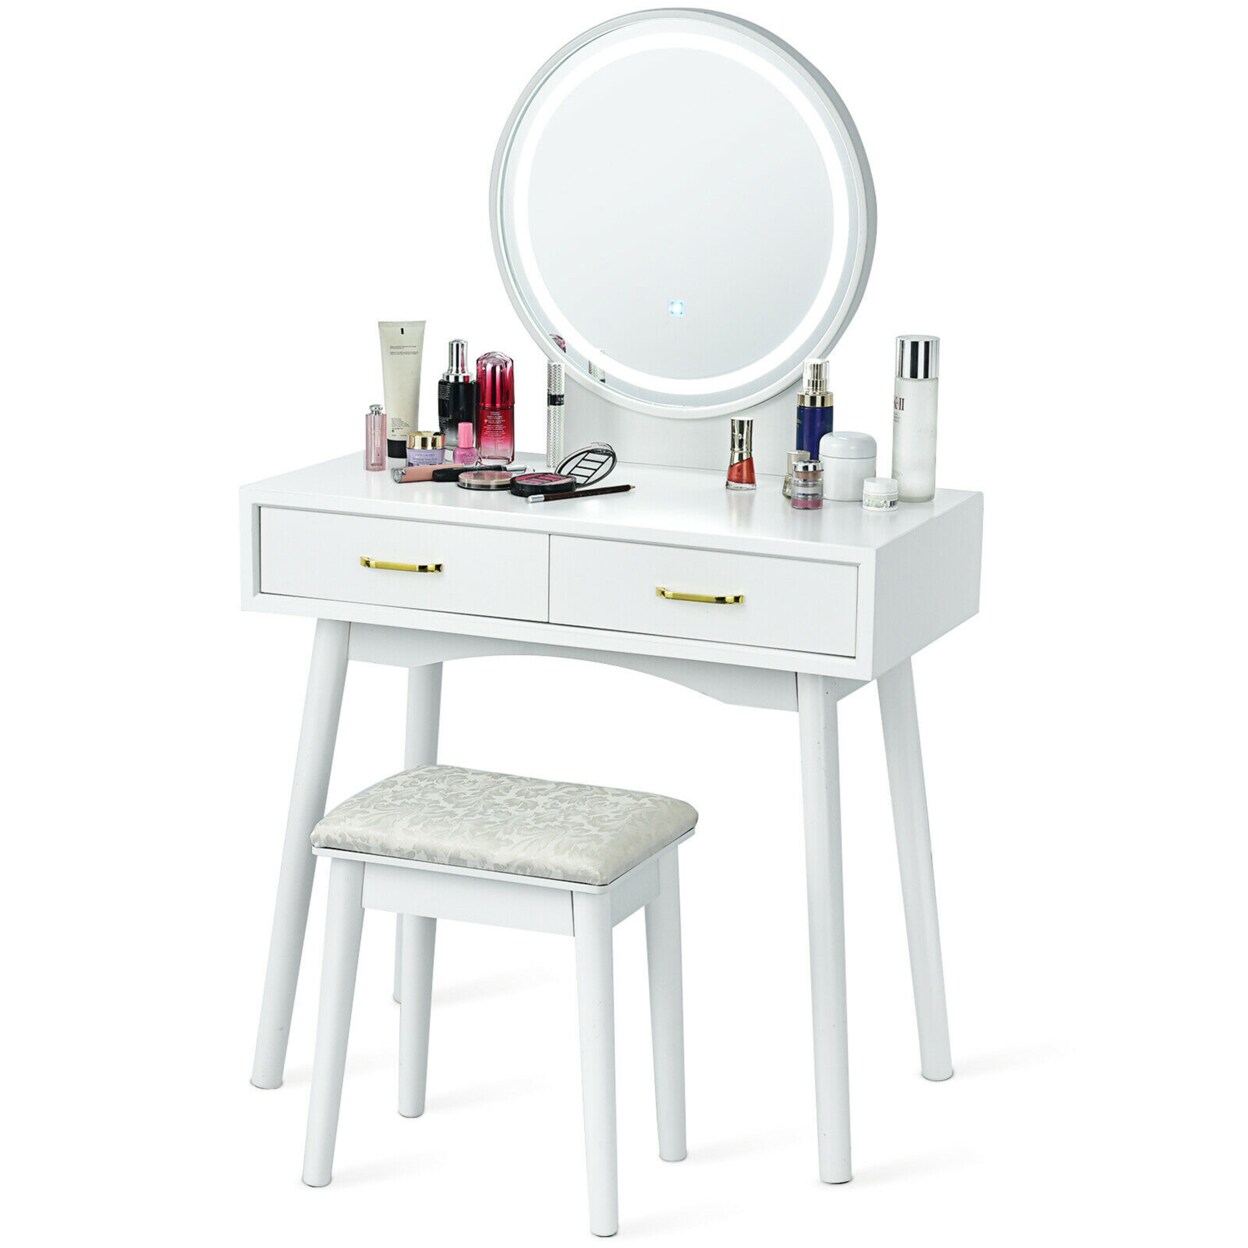 Gymax Vanity Dressing Table Set Touch Screen 3 Lighting Modes Mirror Padded Stool